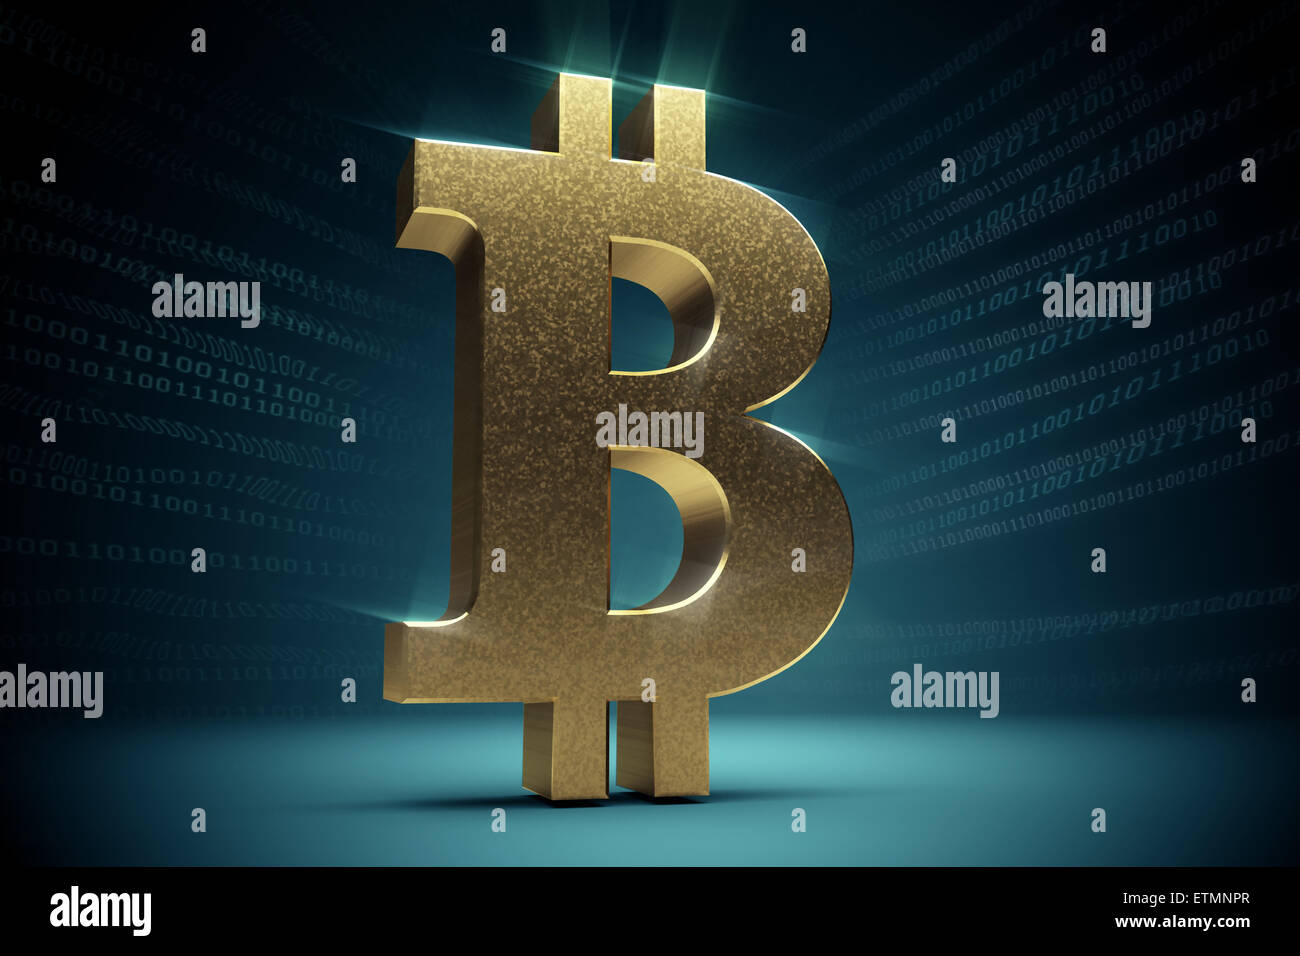 Stylized representation of Bitcoin, a digital currency. Stock Photo